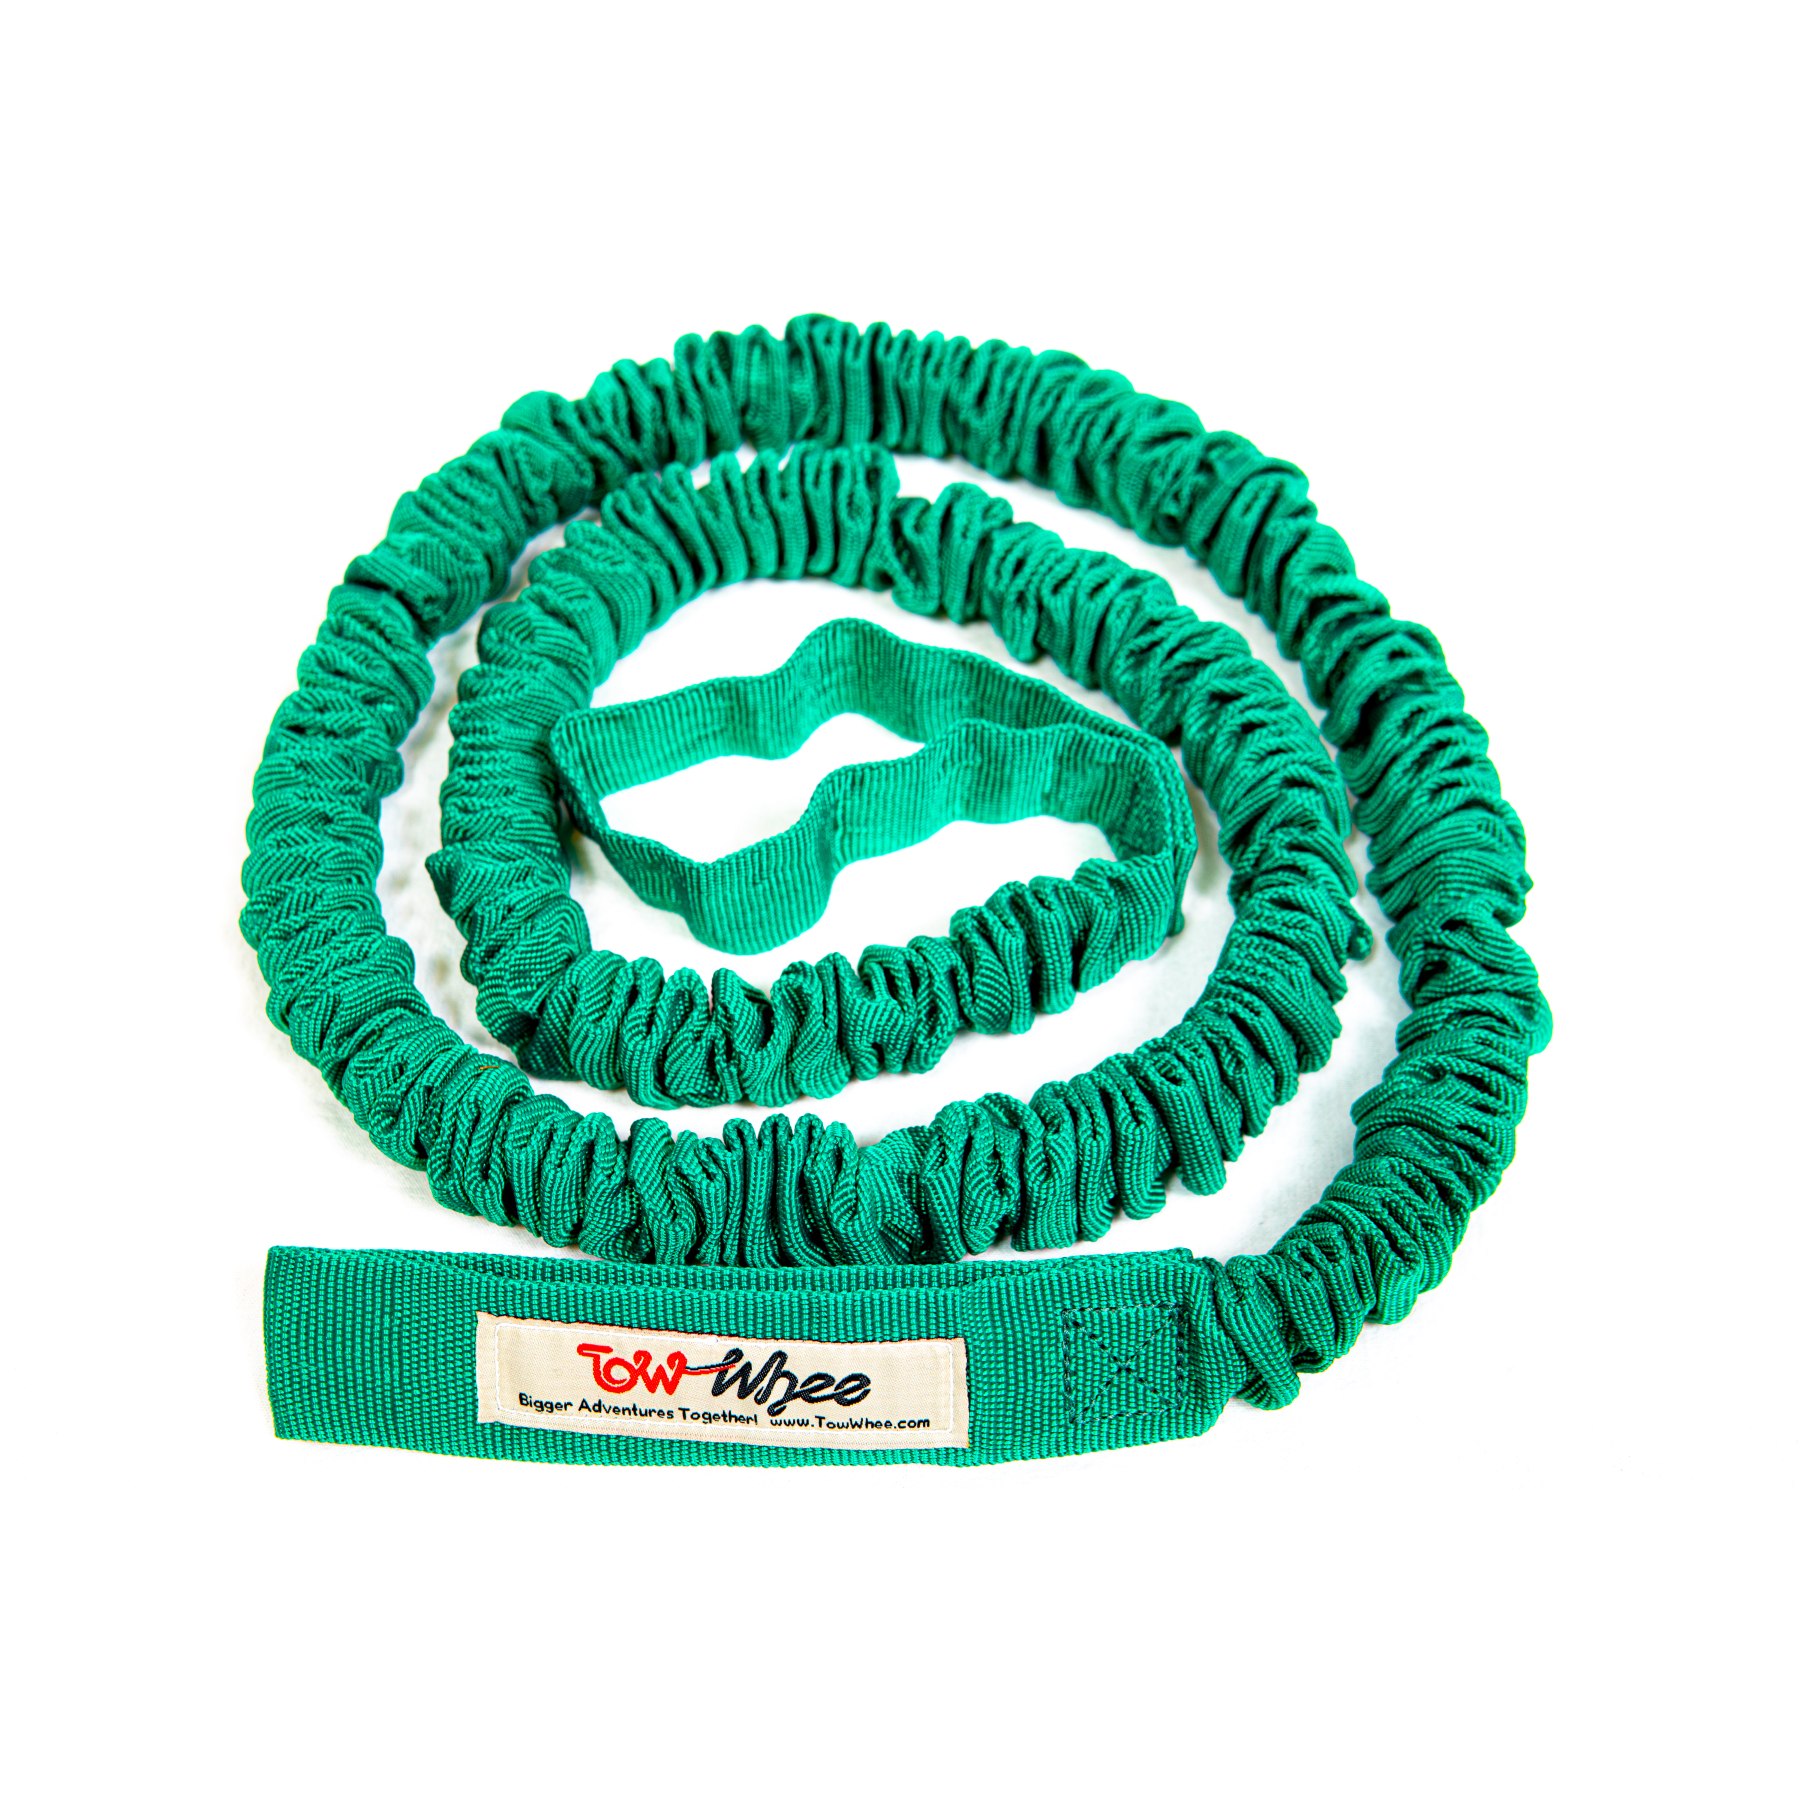 Productfoto van TowWhee Adult Tow Rope for Bicycles - green